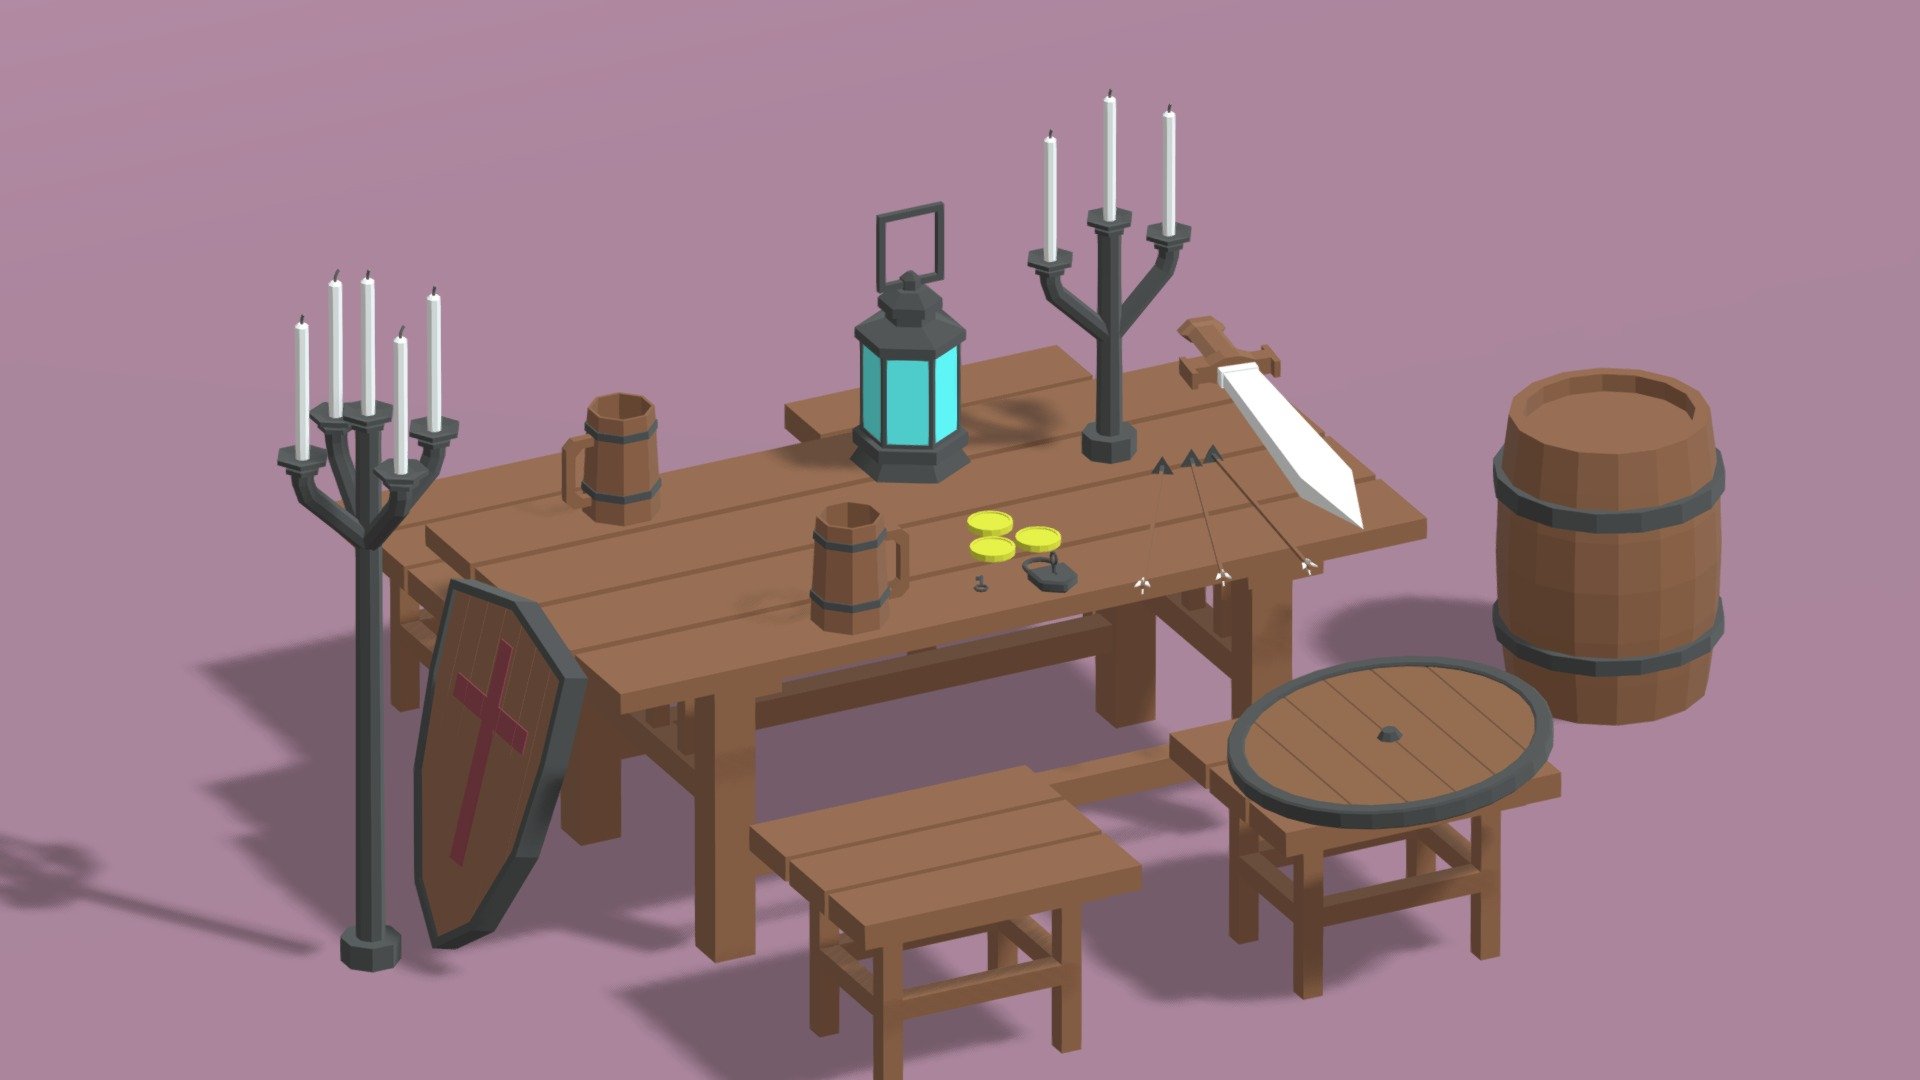 -Cartoon Medieval Tavern Pack.

-This product contains 32 objects.

-Vert: 4,419 poly: 3,833.

-Objects and materials have the correct names.

-This product was created in Blender 2.8.

-Formats: blend, fbx, obj, c4d, dae, abc, stl, u4d glb, unity.

-We hope you enjoy this model.

-Thank you 3d model